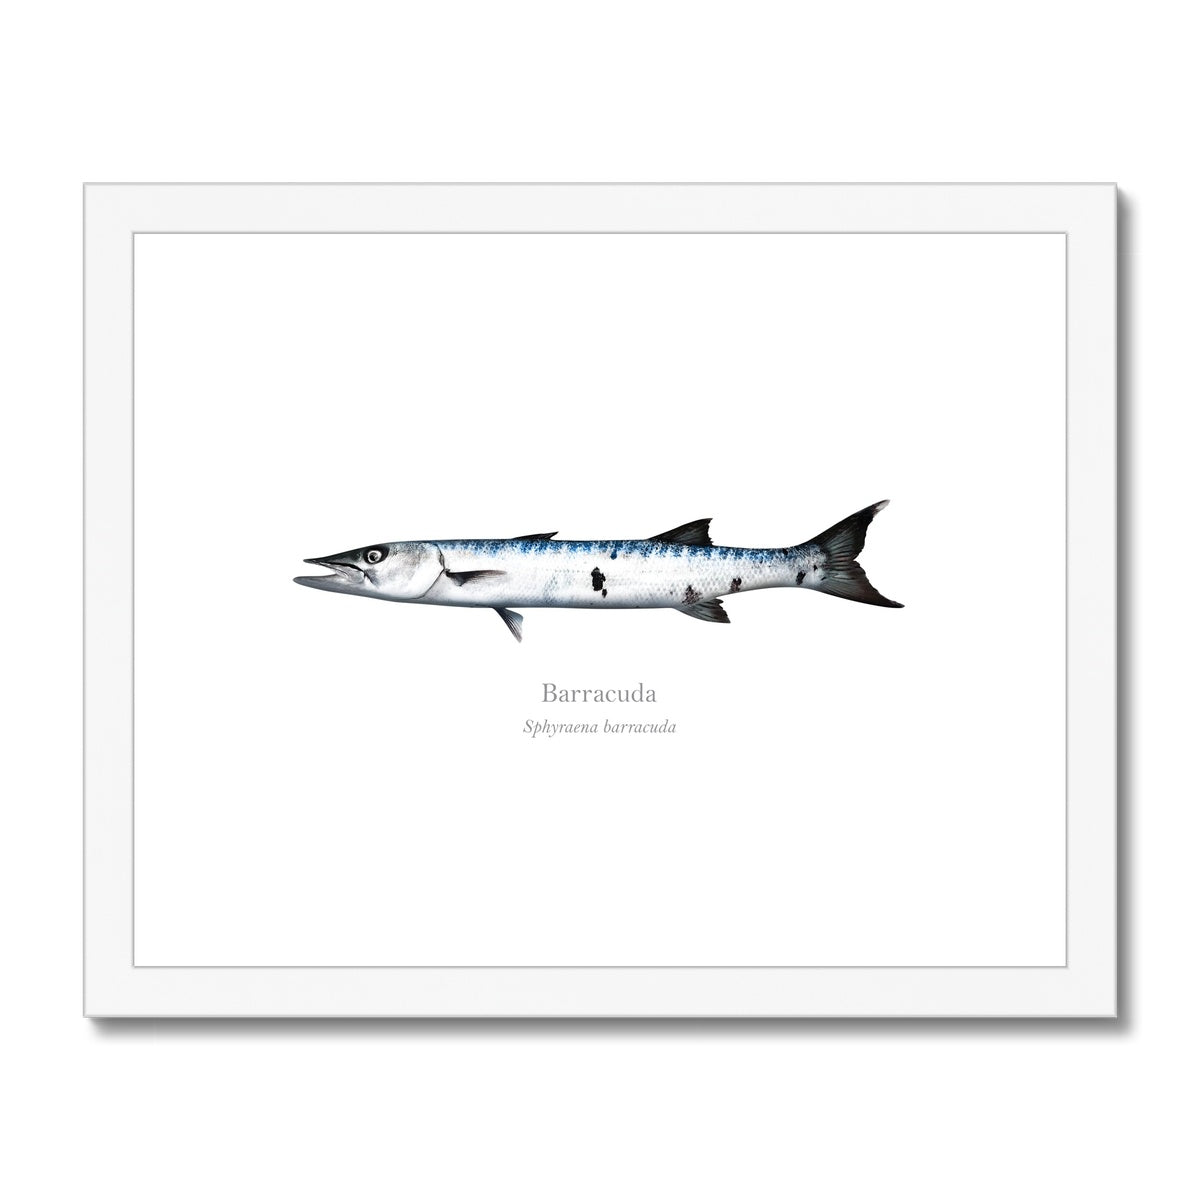 Barracuda - Framed & Mounted Print - With Scientific Name